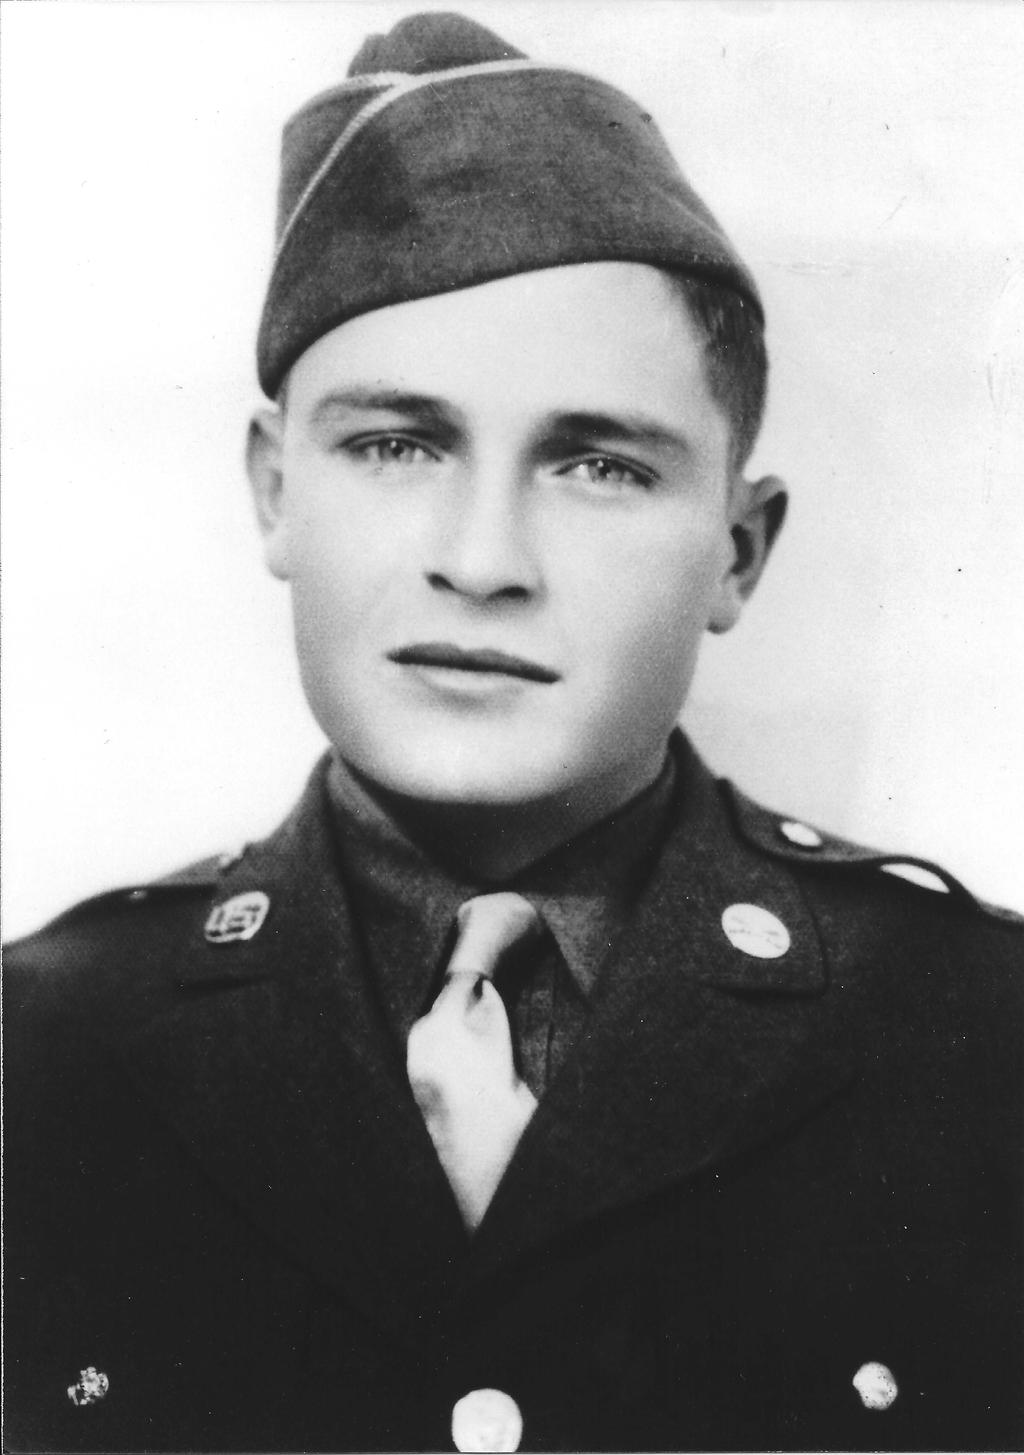 Lloyd Joyce enlisted in the United States Army at Pueblo, Colorado on September 11, 1942.